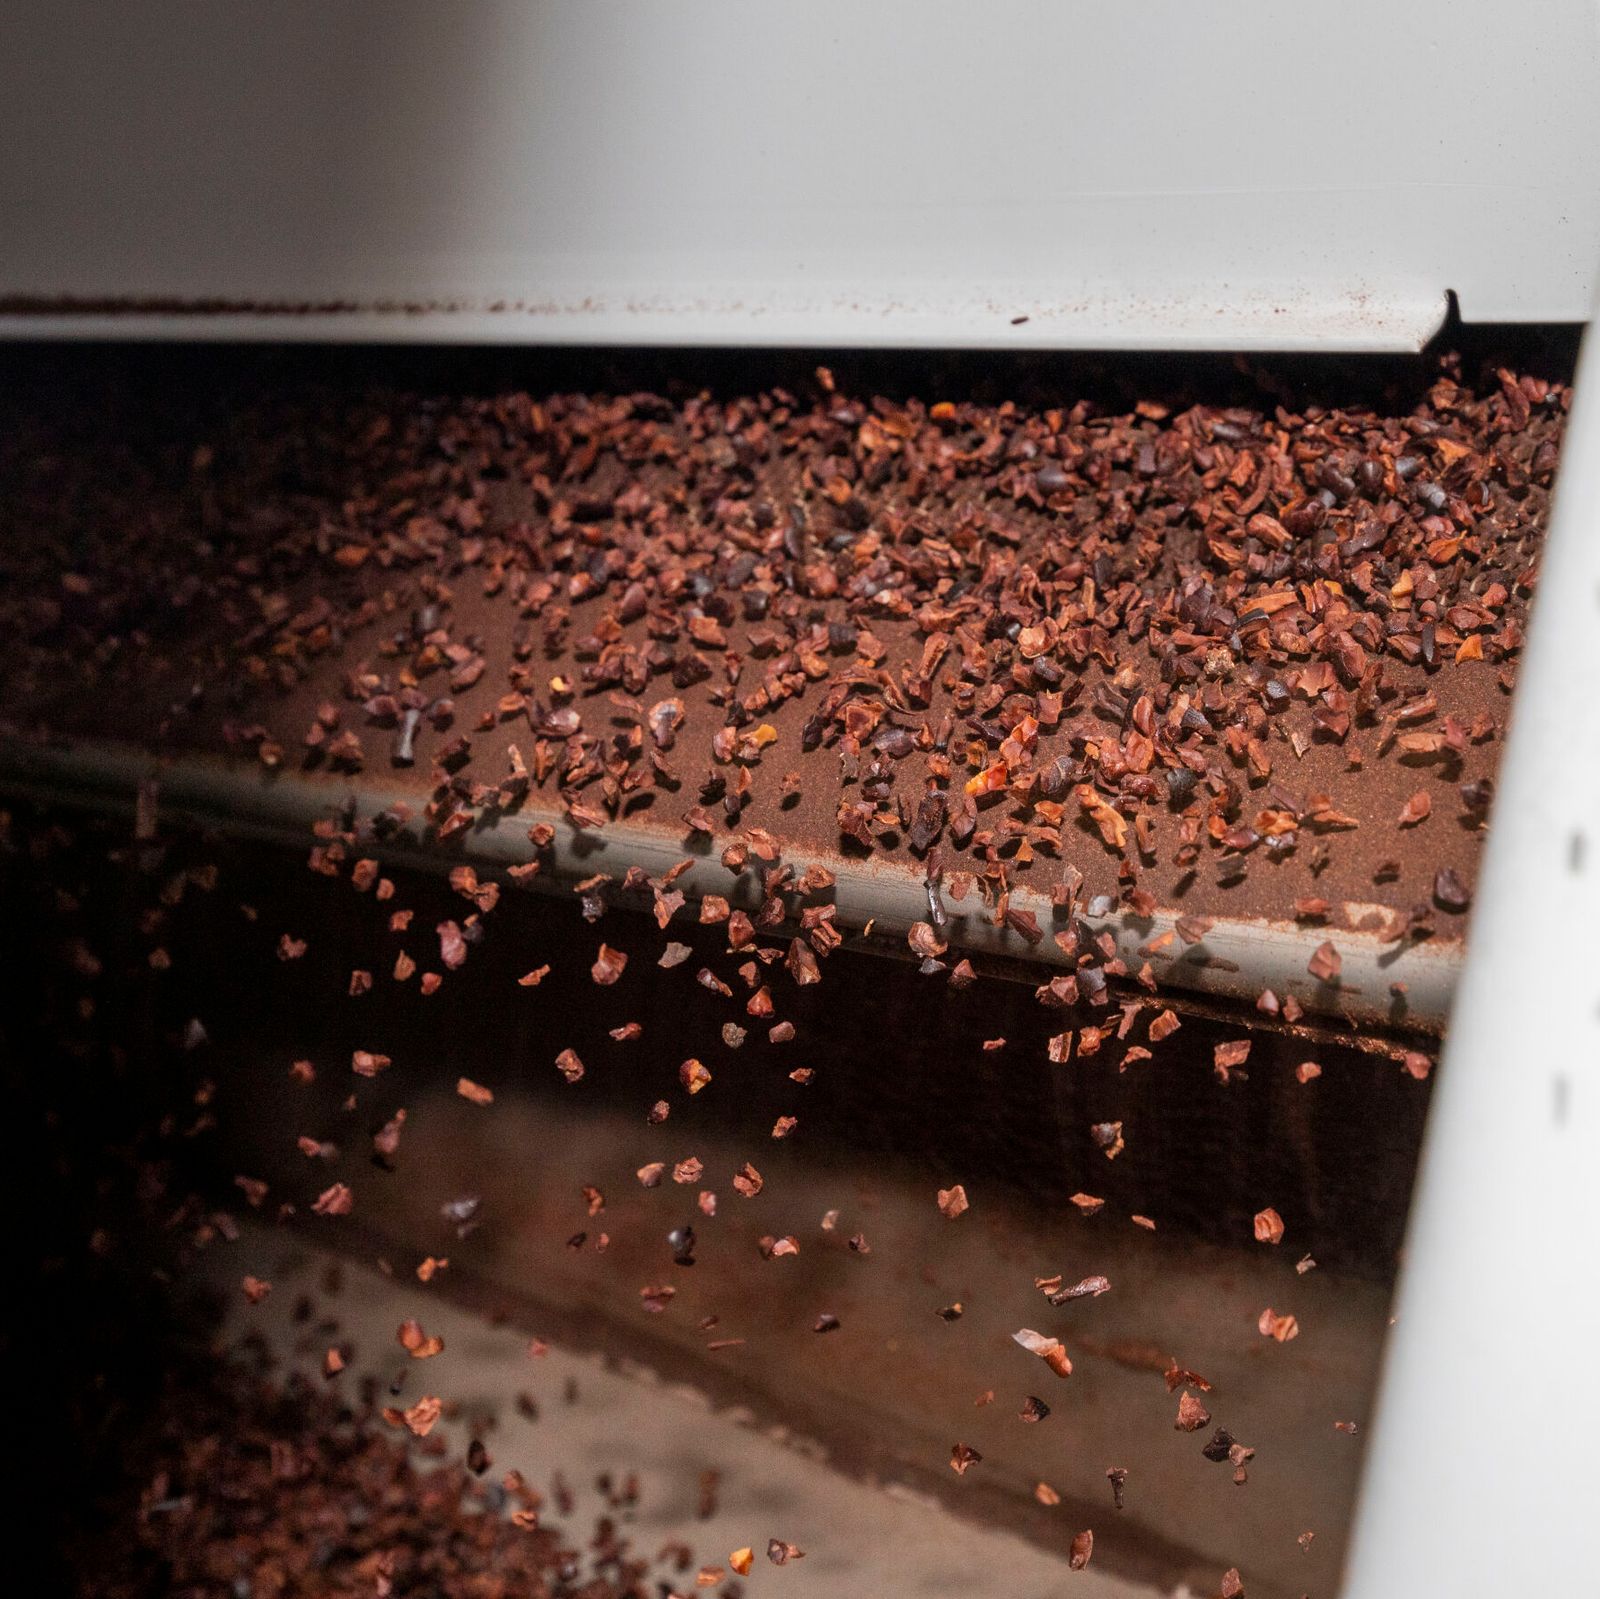 All products that Pronatec processes are fair trade products. So are the cocoa nibs.